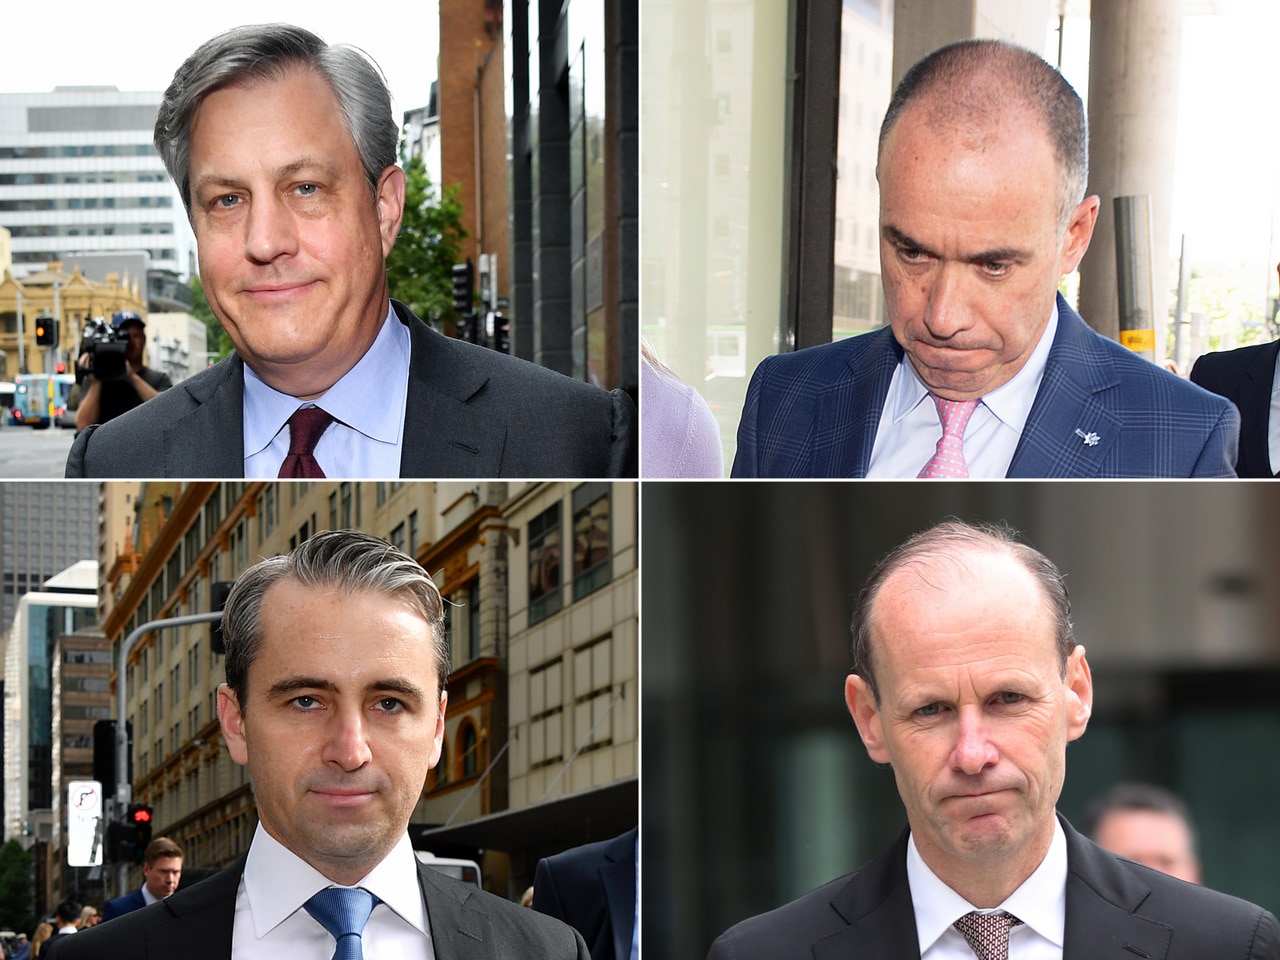 Bank CEOs attend the Royal Commission from top left to right: Westpac's Brian Hartzer, NAB's Andrew Thorburn, CBA's Matt Comyn and ANZ's Shayne Elliott.